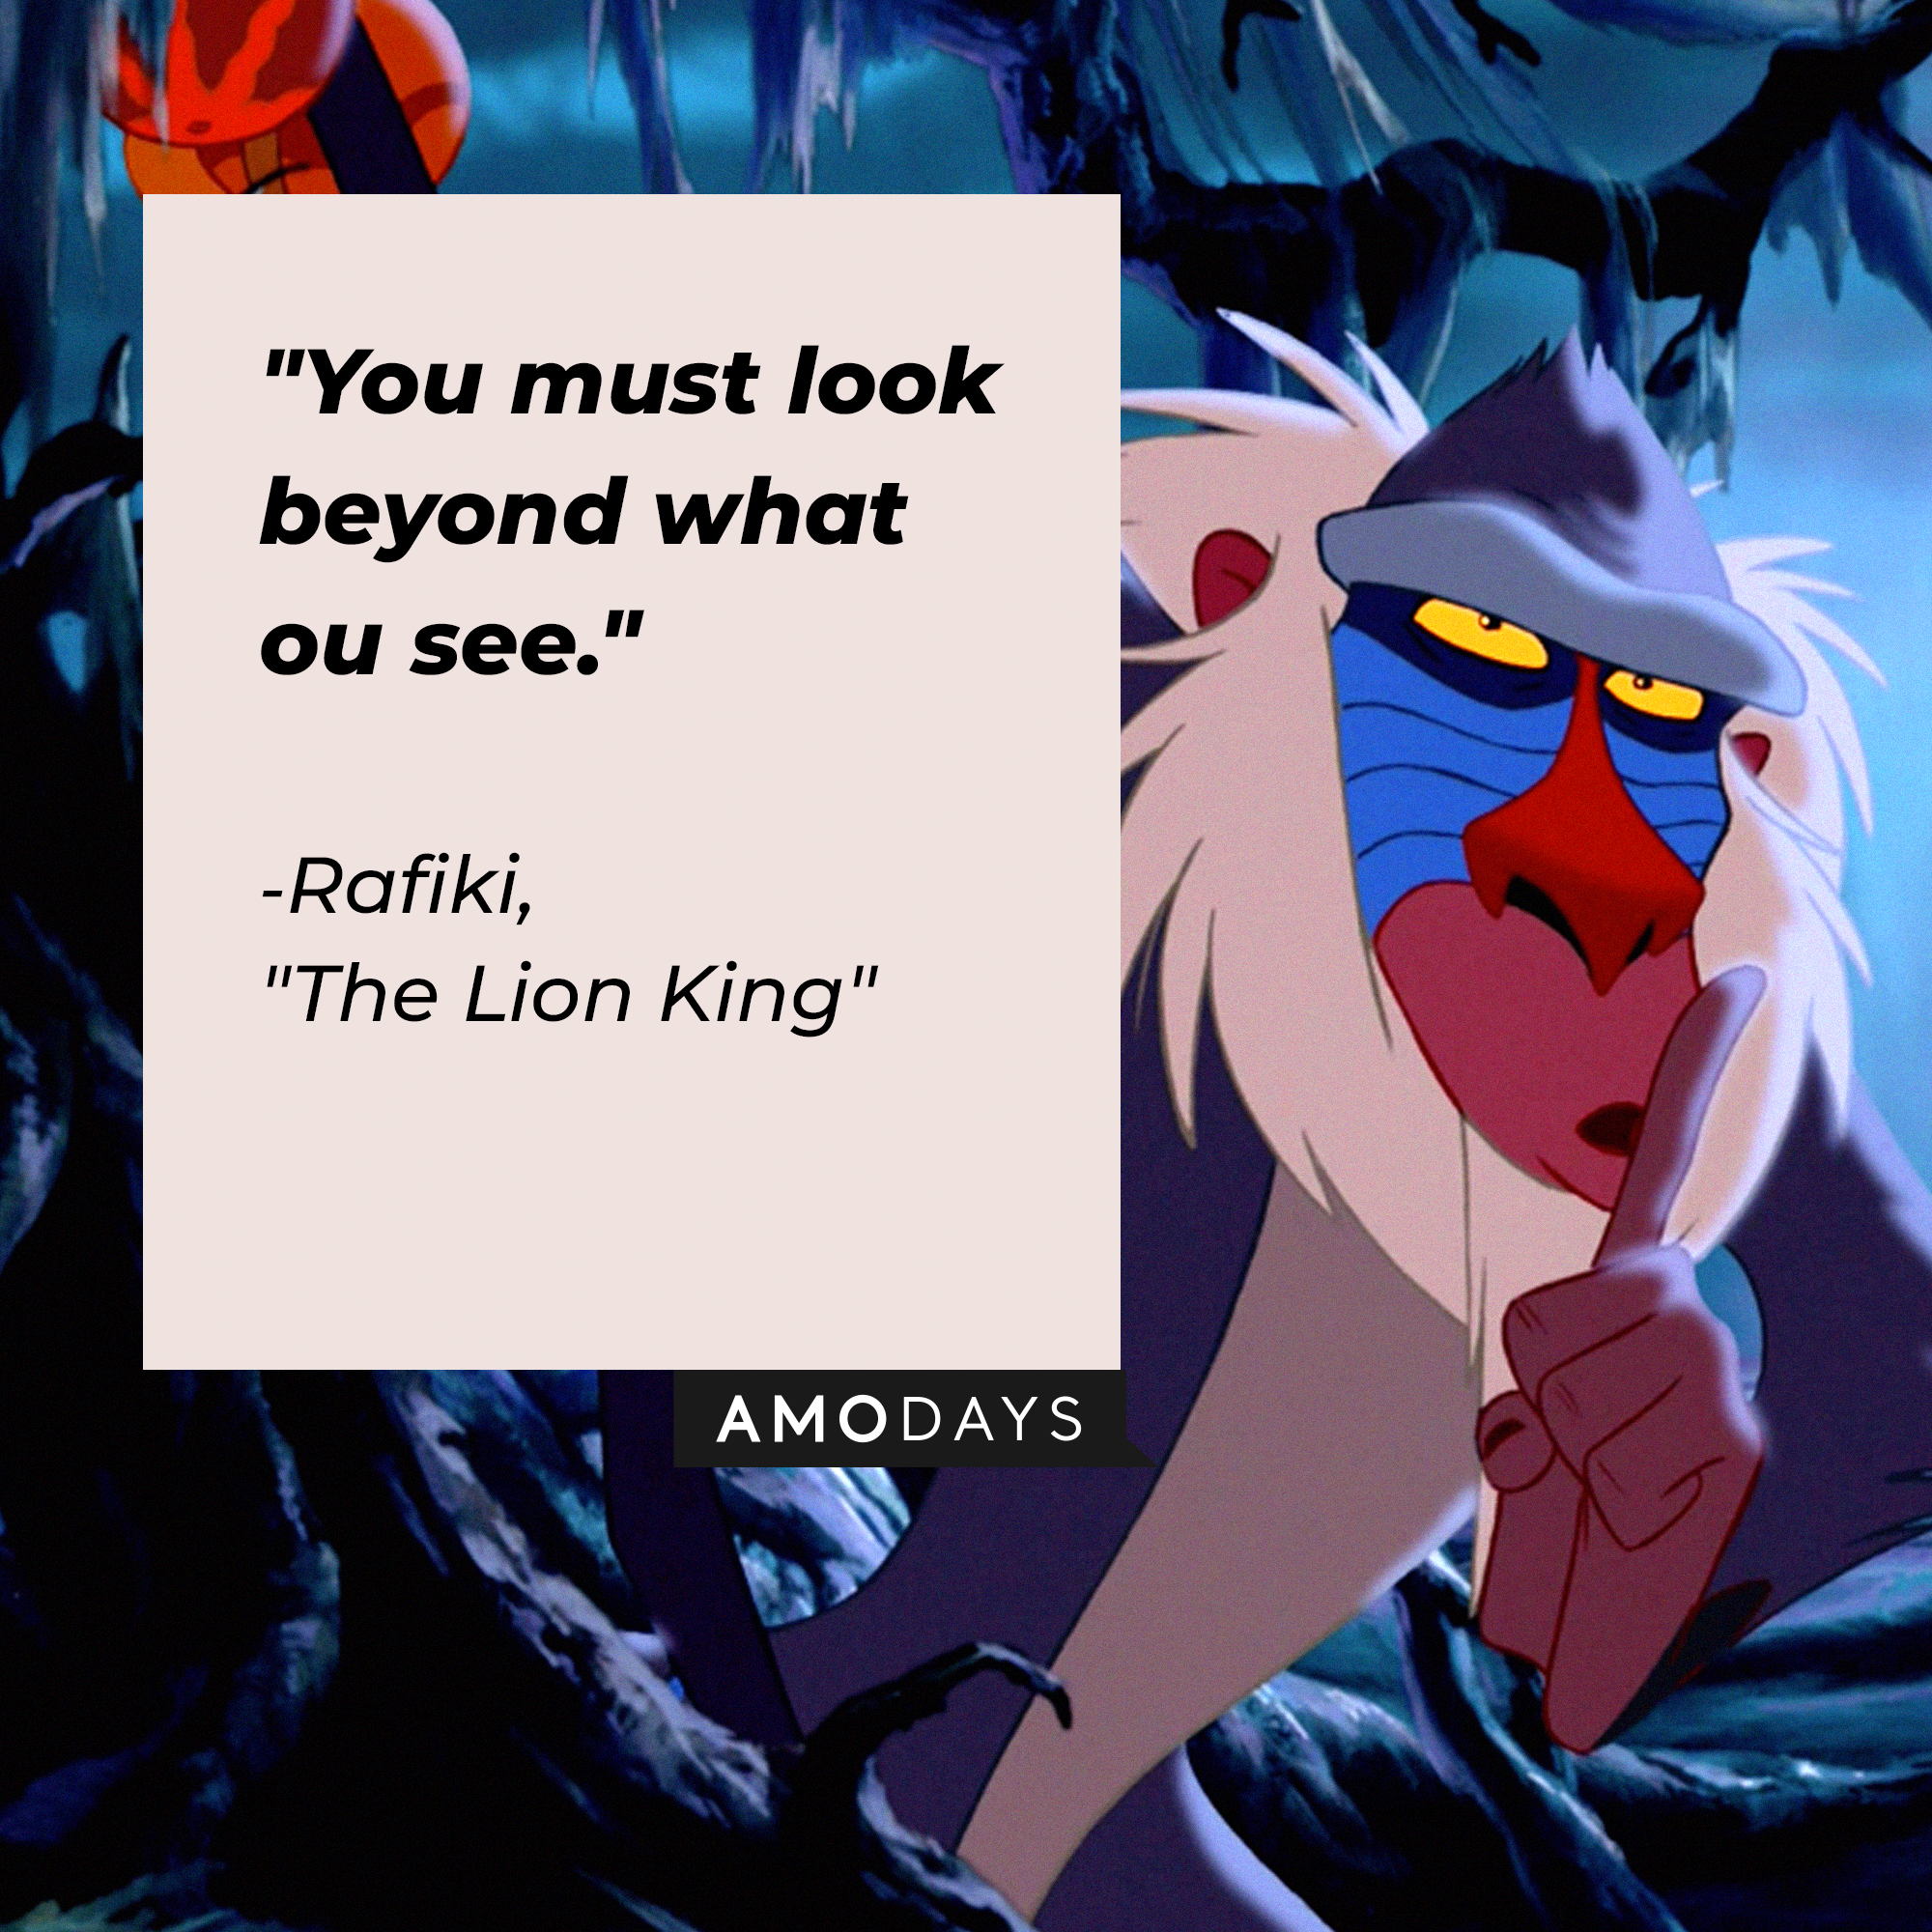 Simba with his quote: "You must look beyond what you see." | Source: Facebook.com/DisneyTheLionKing